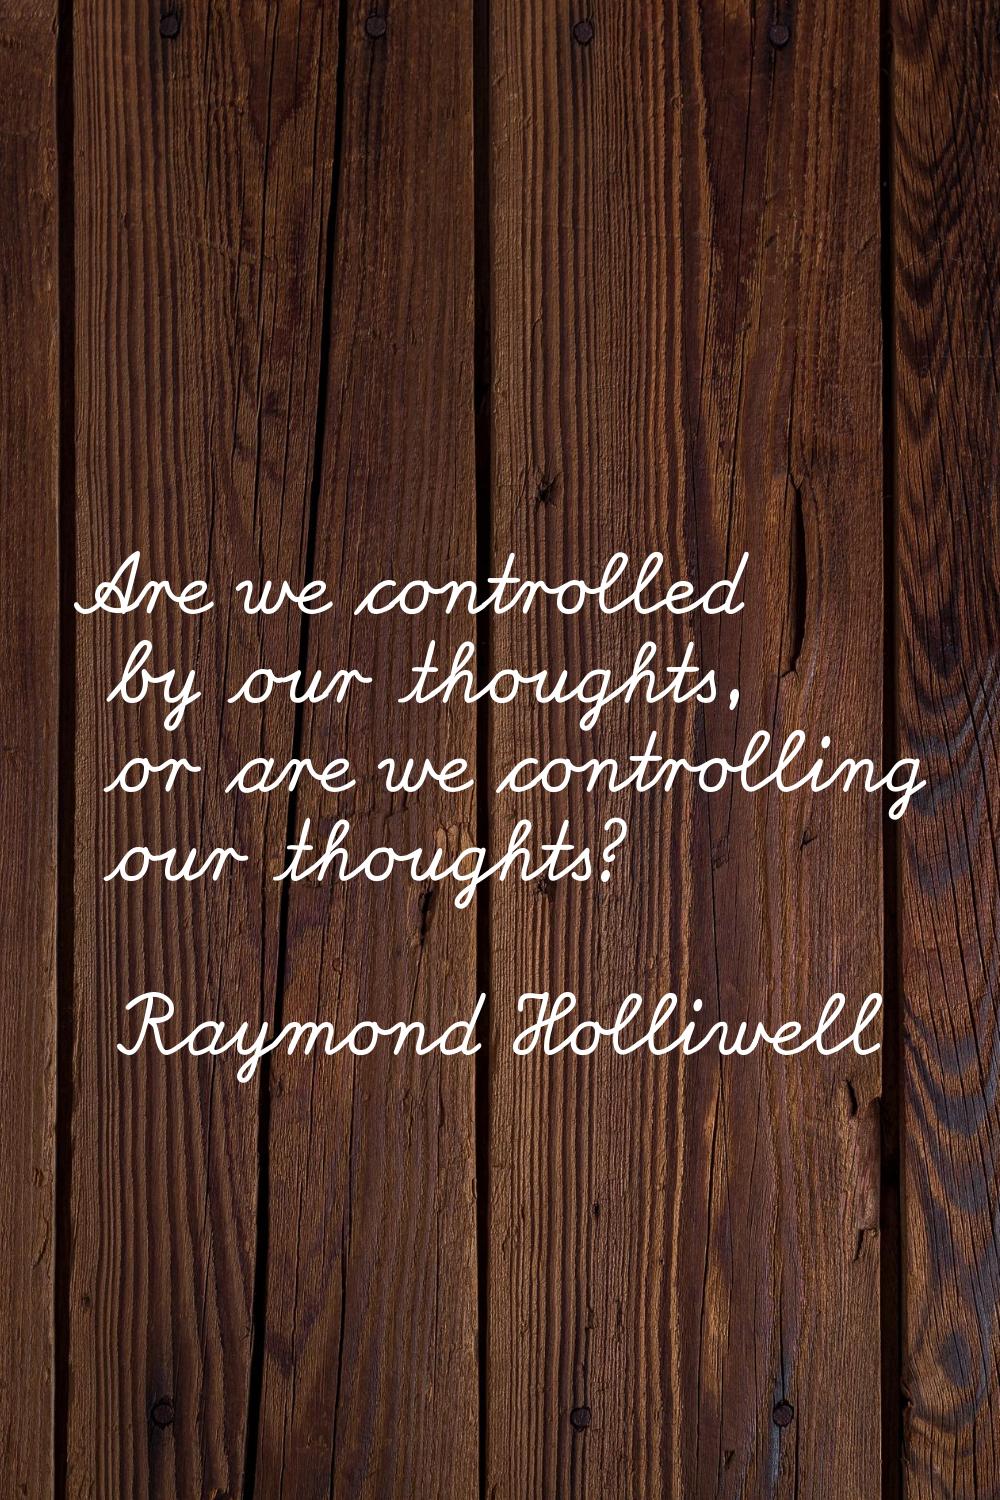 Are we controlled by our thoughts, or are we controlling our thoughts?